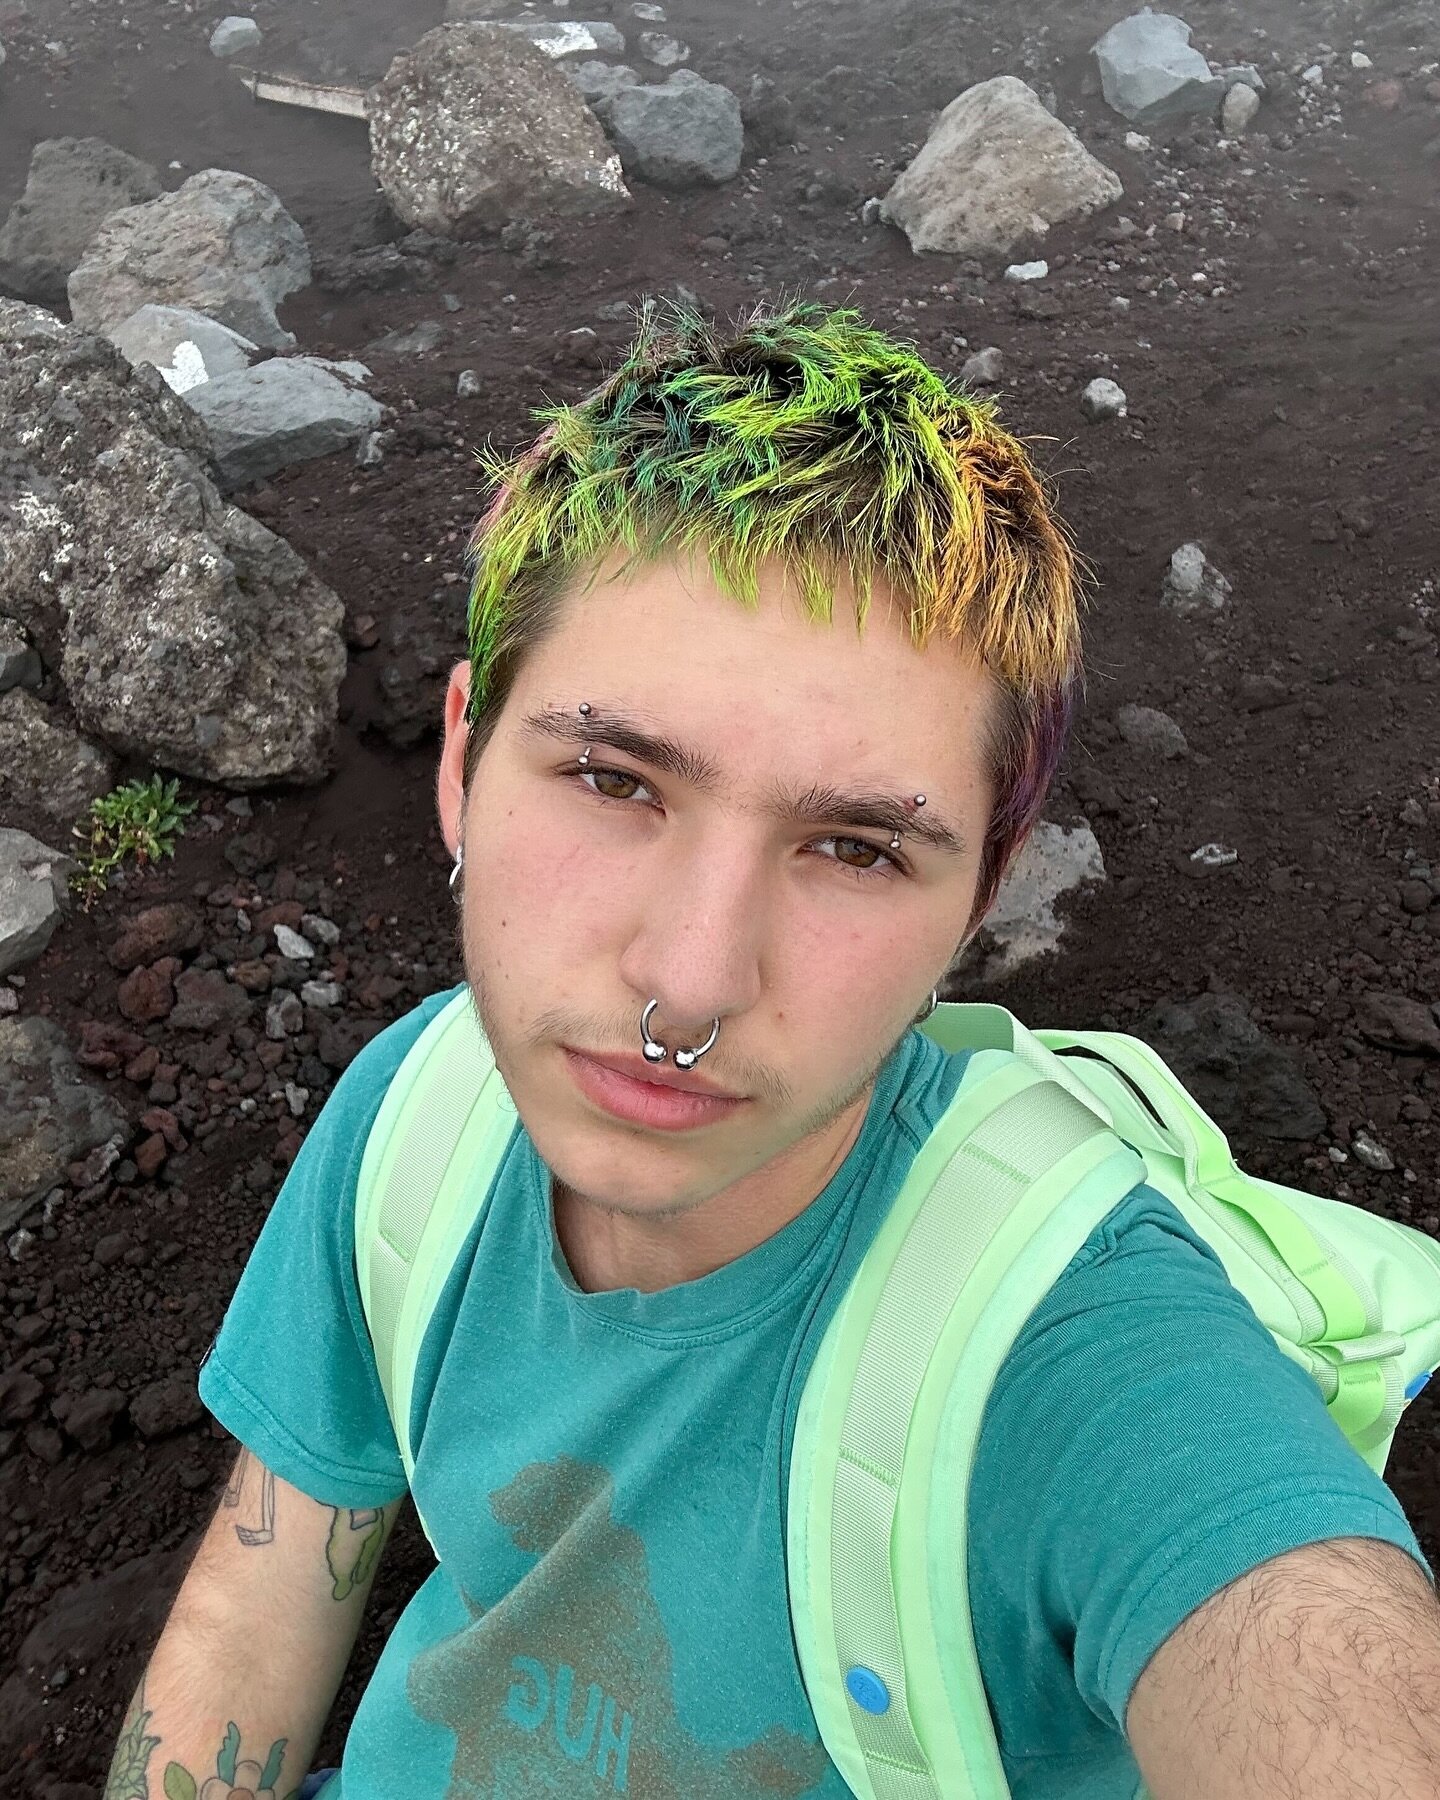 Welcome to the team Jude!!
Aka: @telemetics pronouns:he/she/they
Jude is a stylist who is passionate about gender affirming hair. They especially enjoy doing short textured haircuts and creative color work.
You can book w/them 11am-5p fri's/sat's @kn